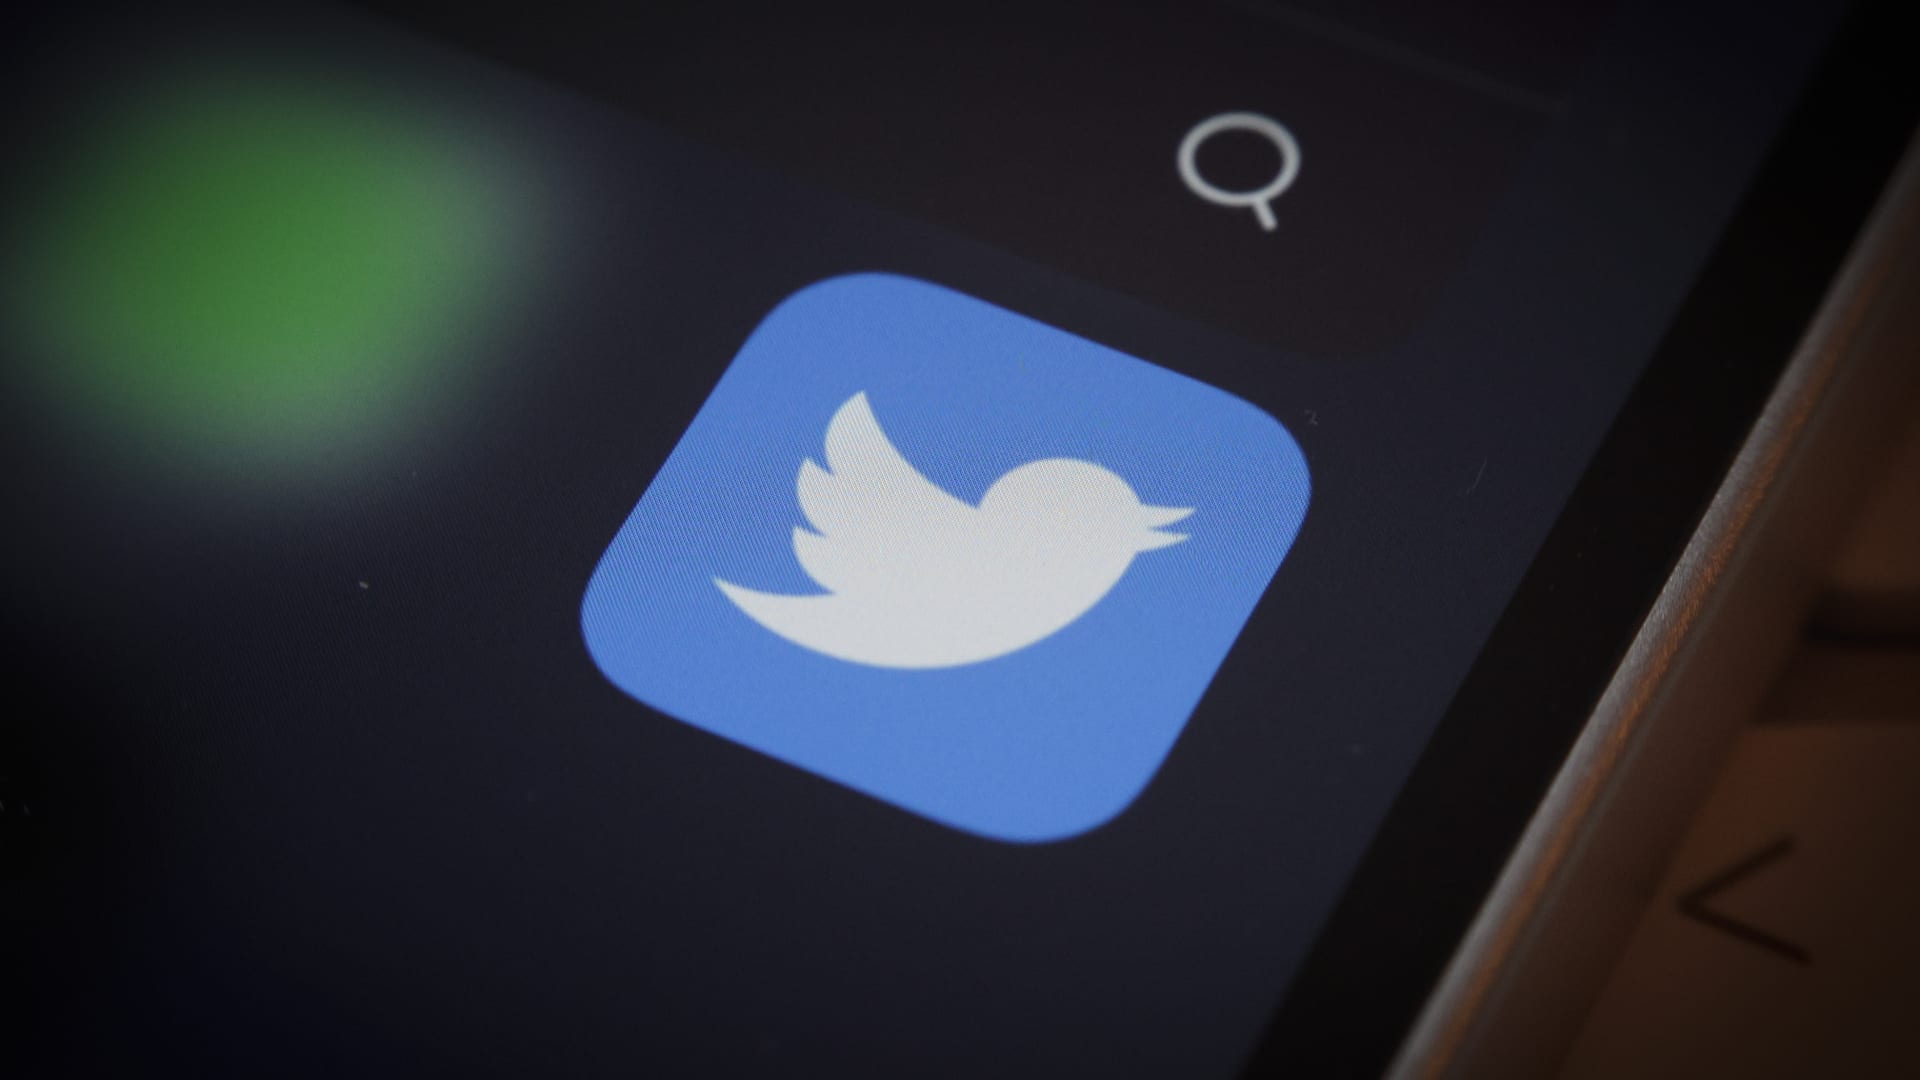 Advertisers will return to Twitter if a few core conditions are met, ad guru says